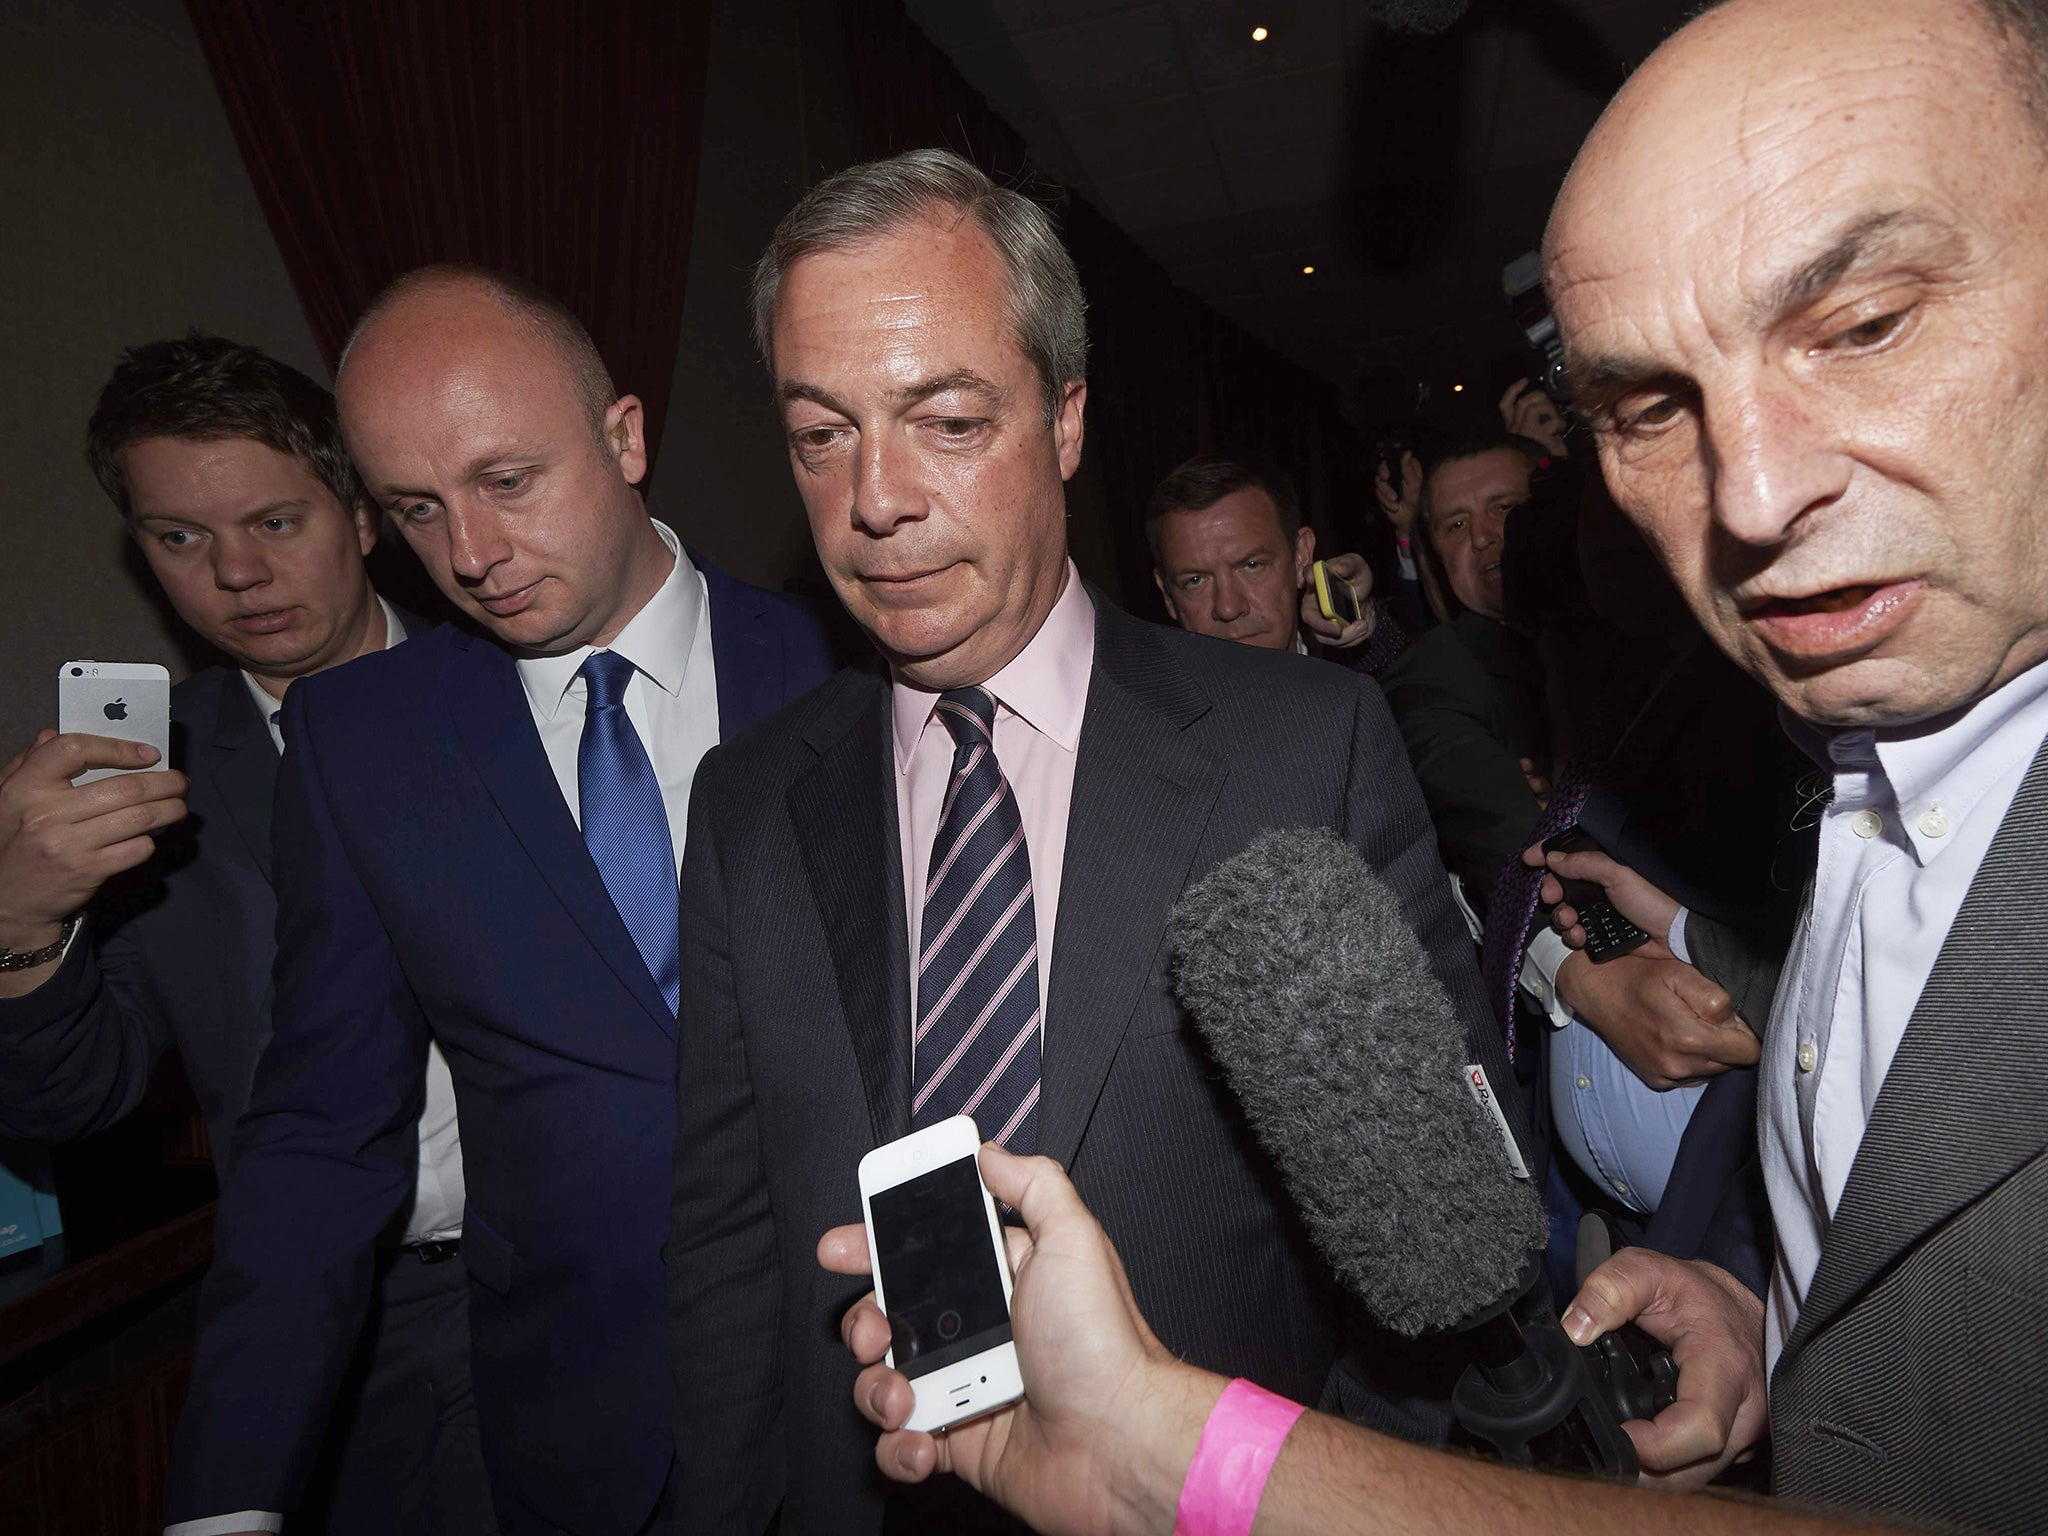 Farage kept the promise he made that he would quit the Ukip leadership if he failed to win a seat